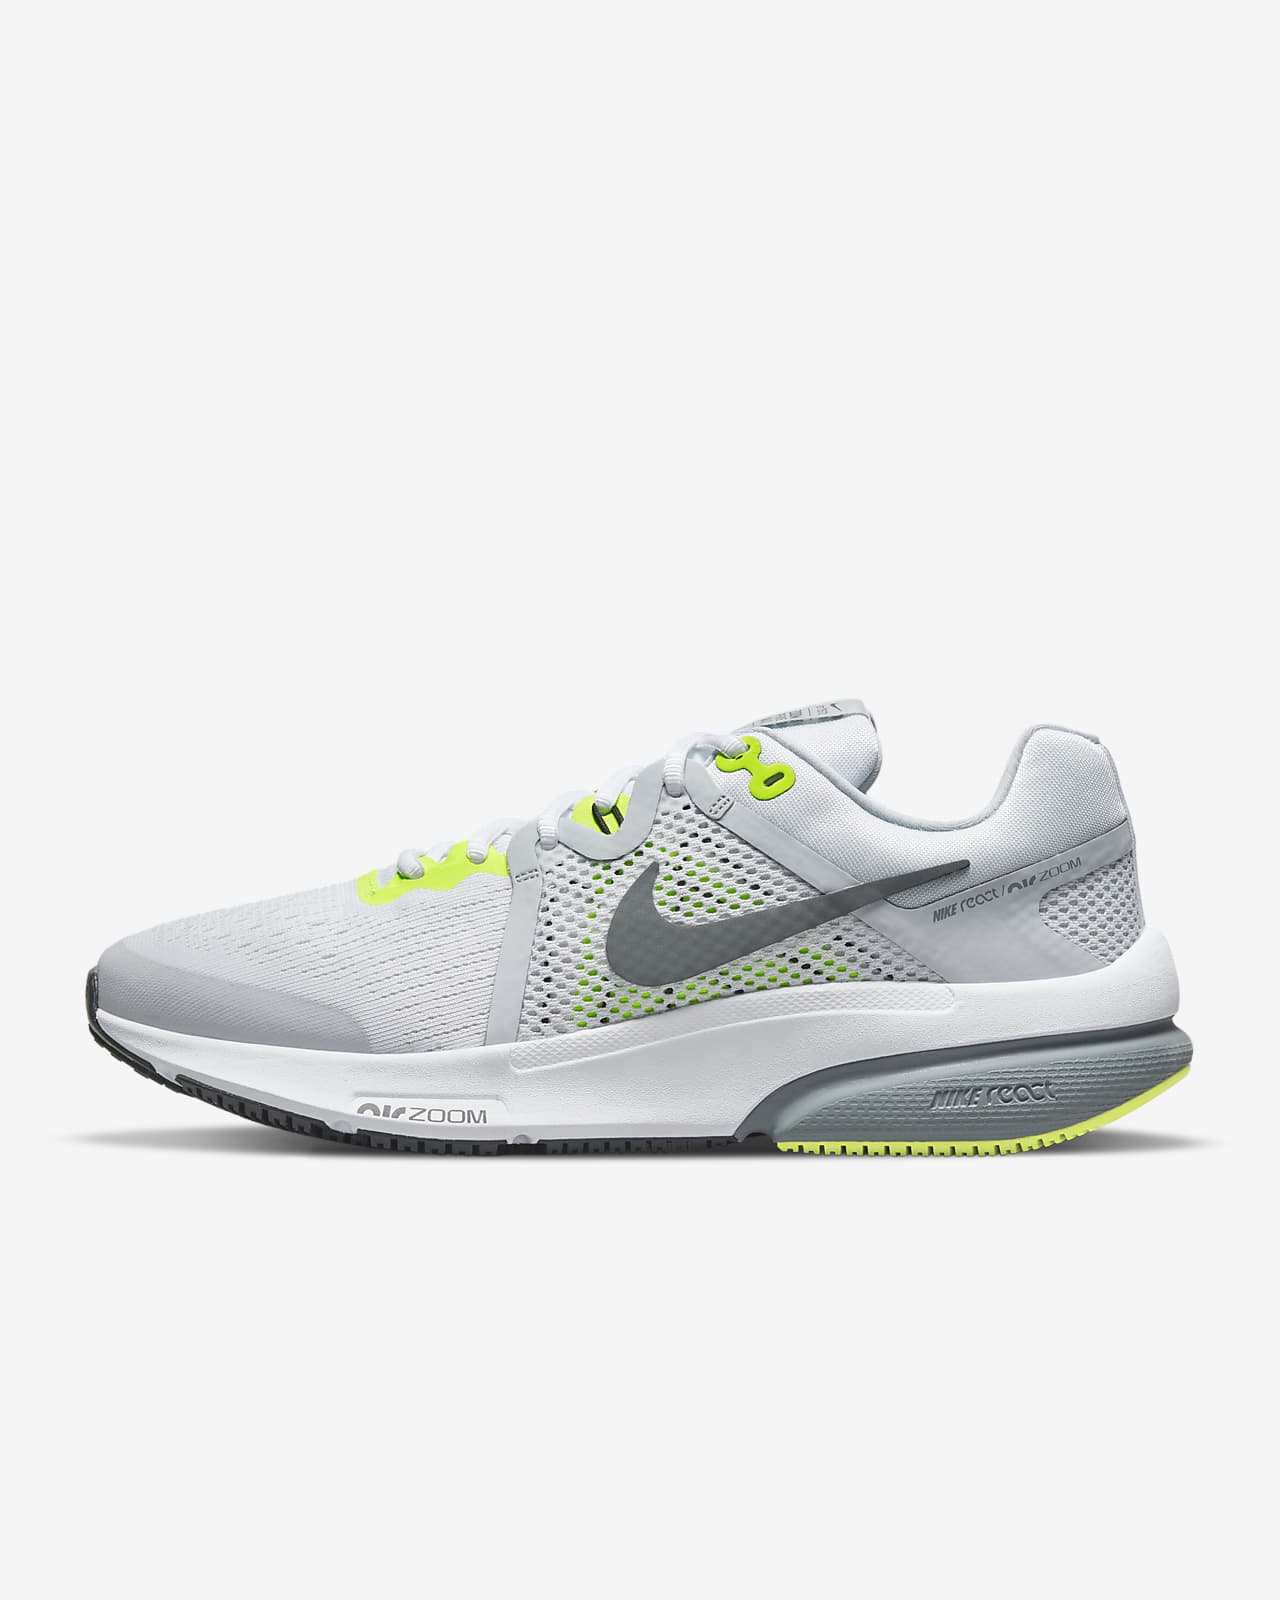 Nike Zoom Prevail Men's Running Shoes